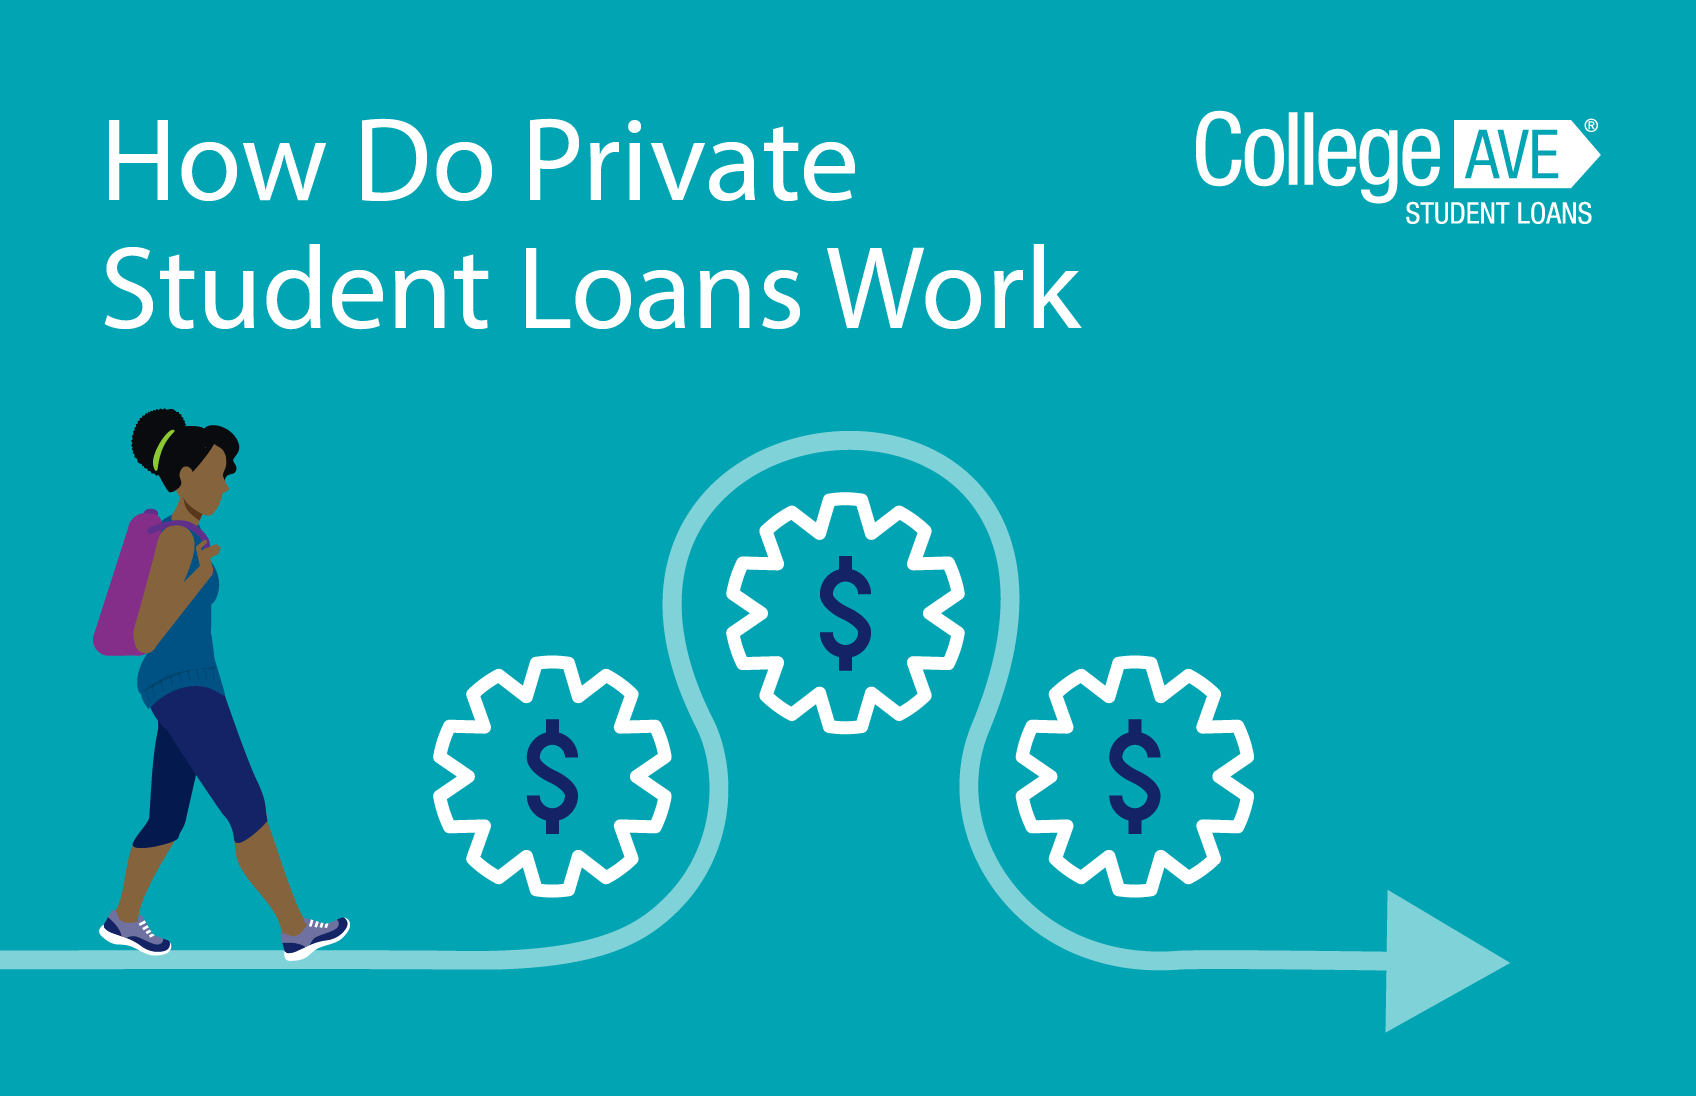 How Do Private Student Loans Work? Key Facts About Private Student